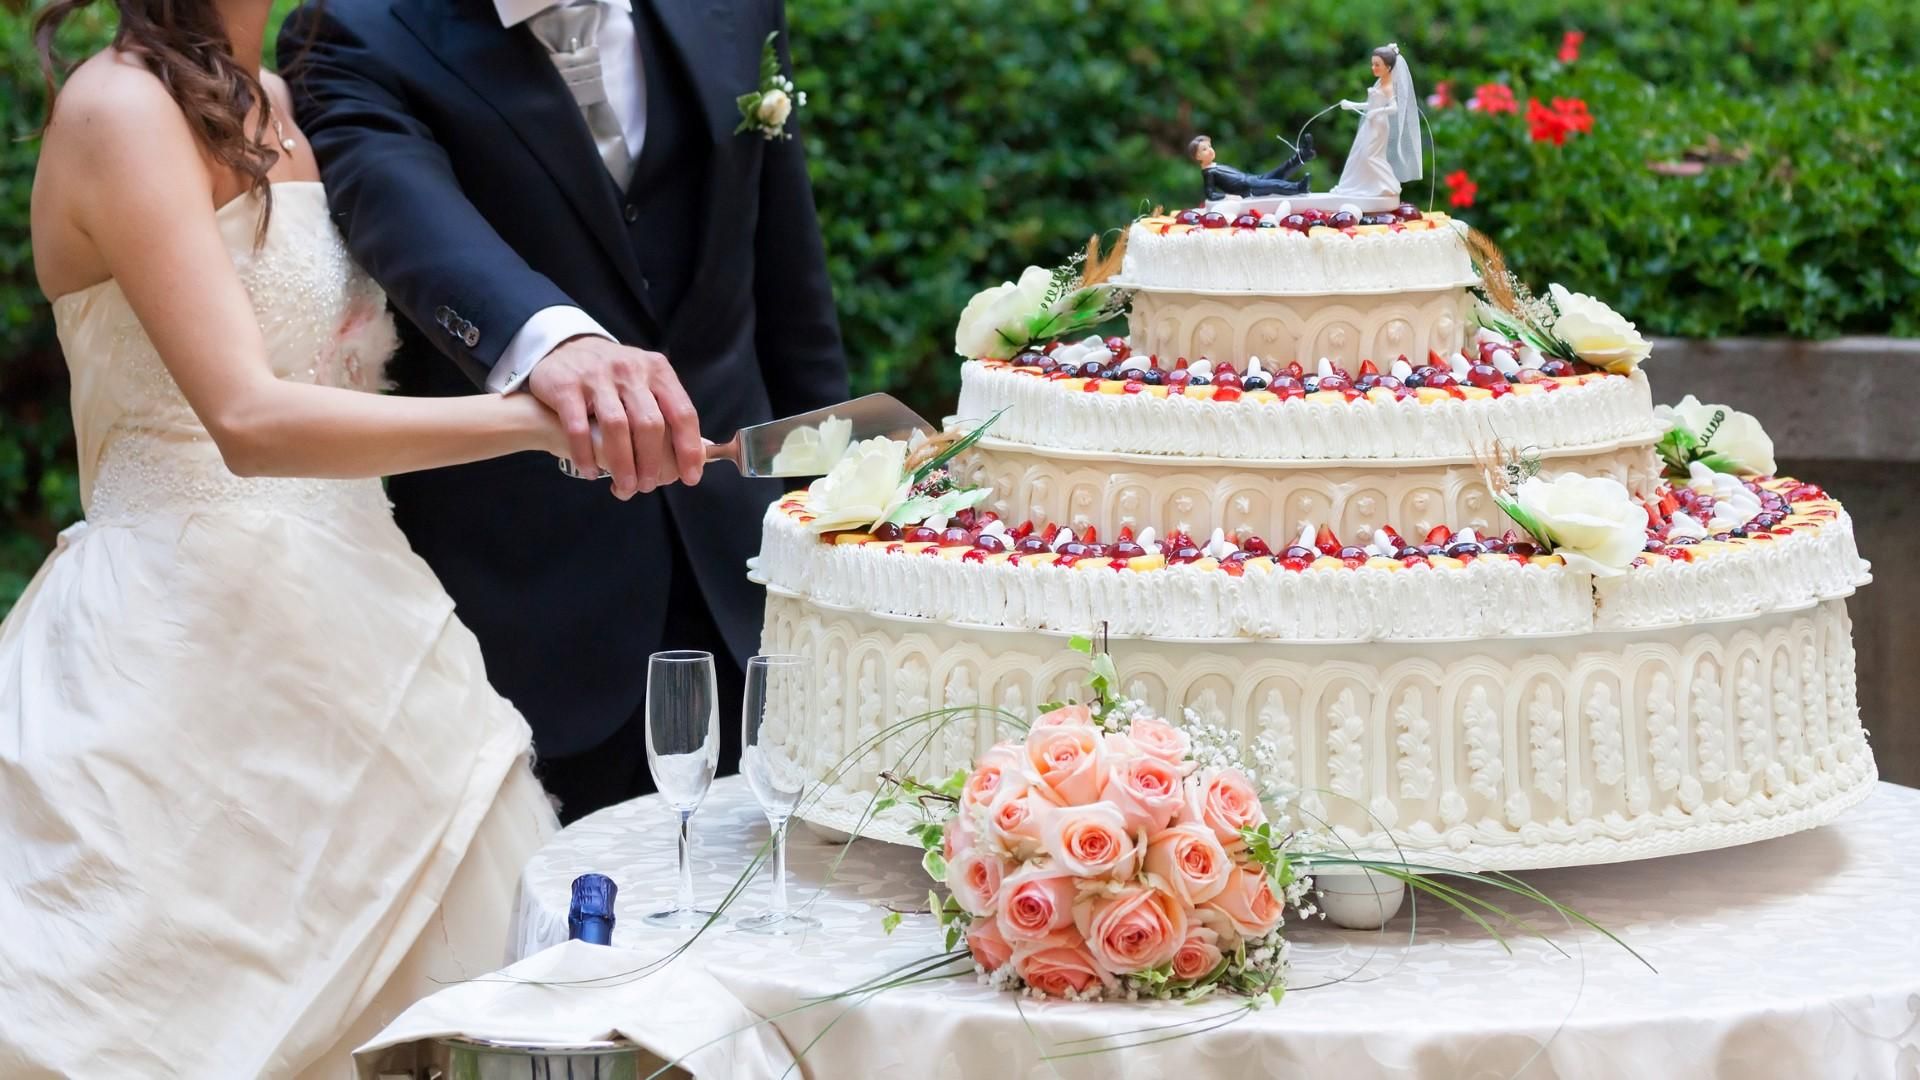 The Sweetest Start to Forever: Choosing the Perfect Wedding Cake